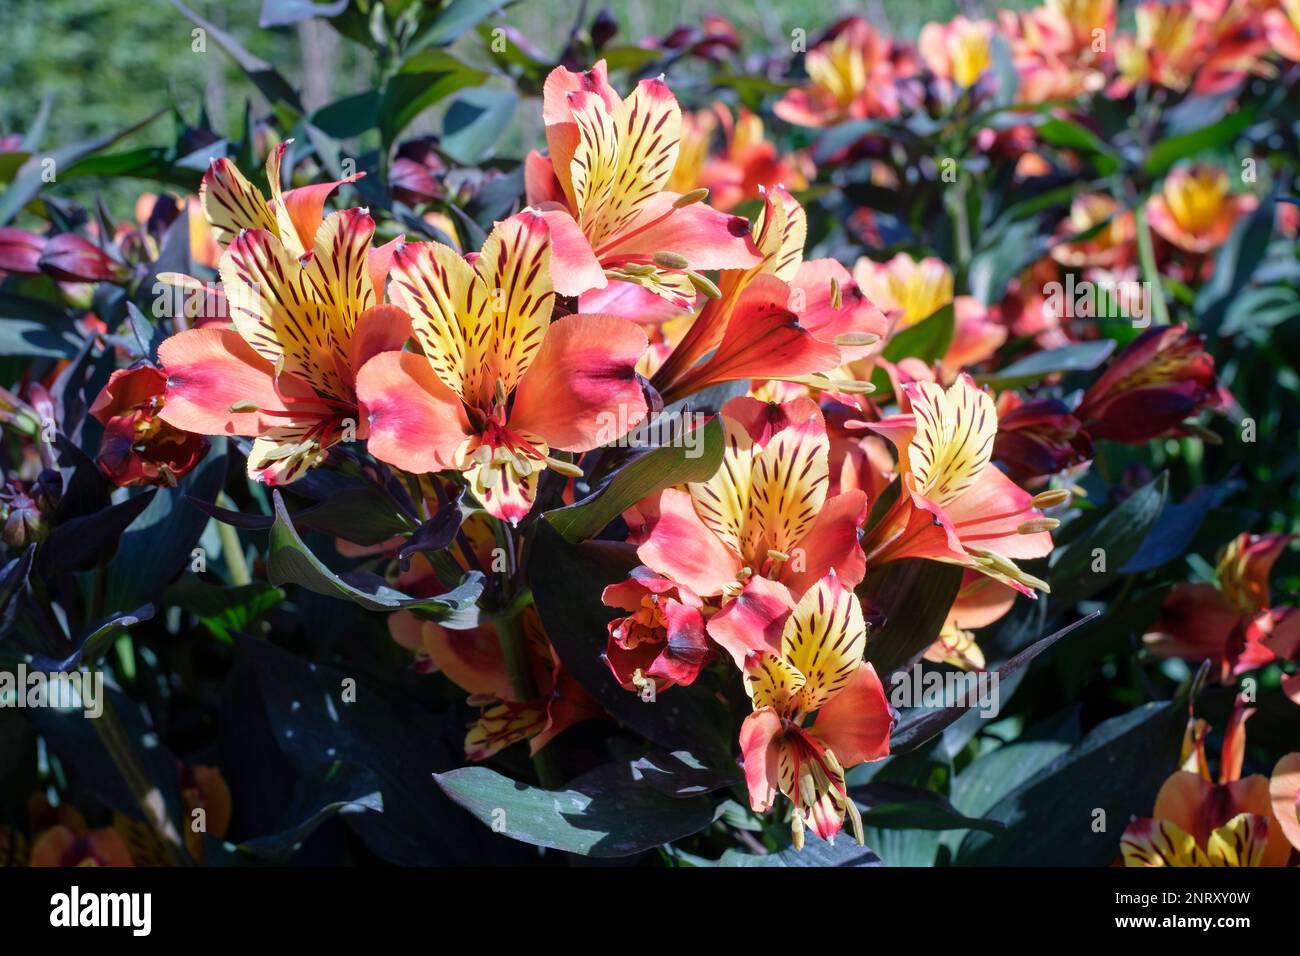 Peruvian lily Indian summer, Alstroemeria Tesronto, perennial, funnel-shaped flowers, bright copper-orange, yellow inner petals, speckled purple-brown Stock Photo